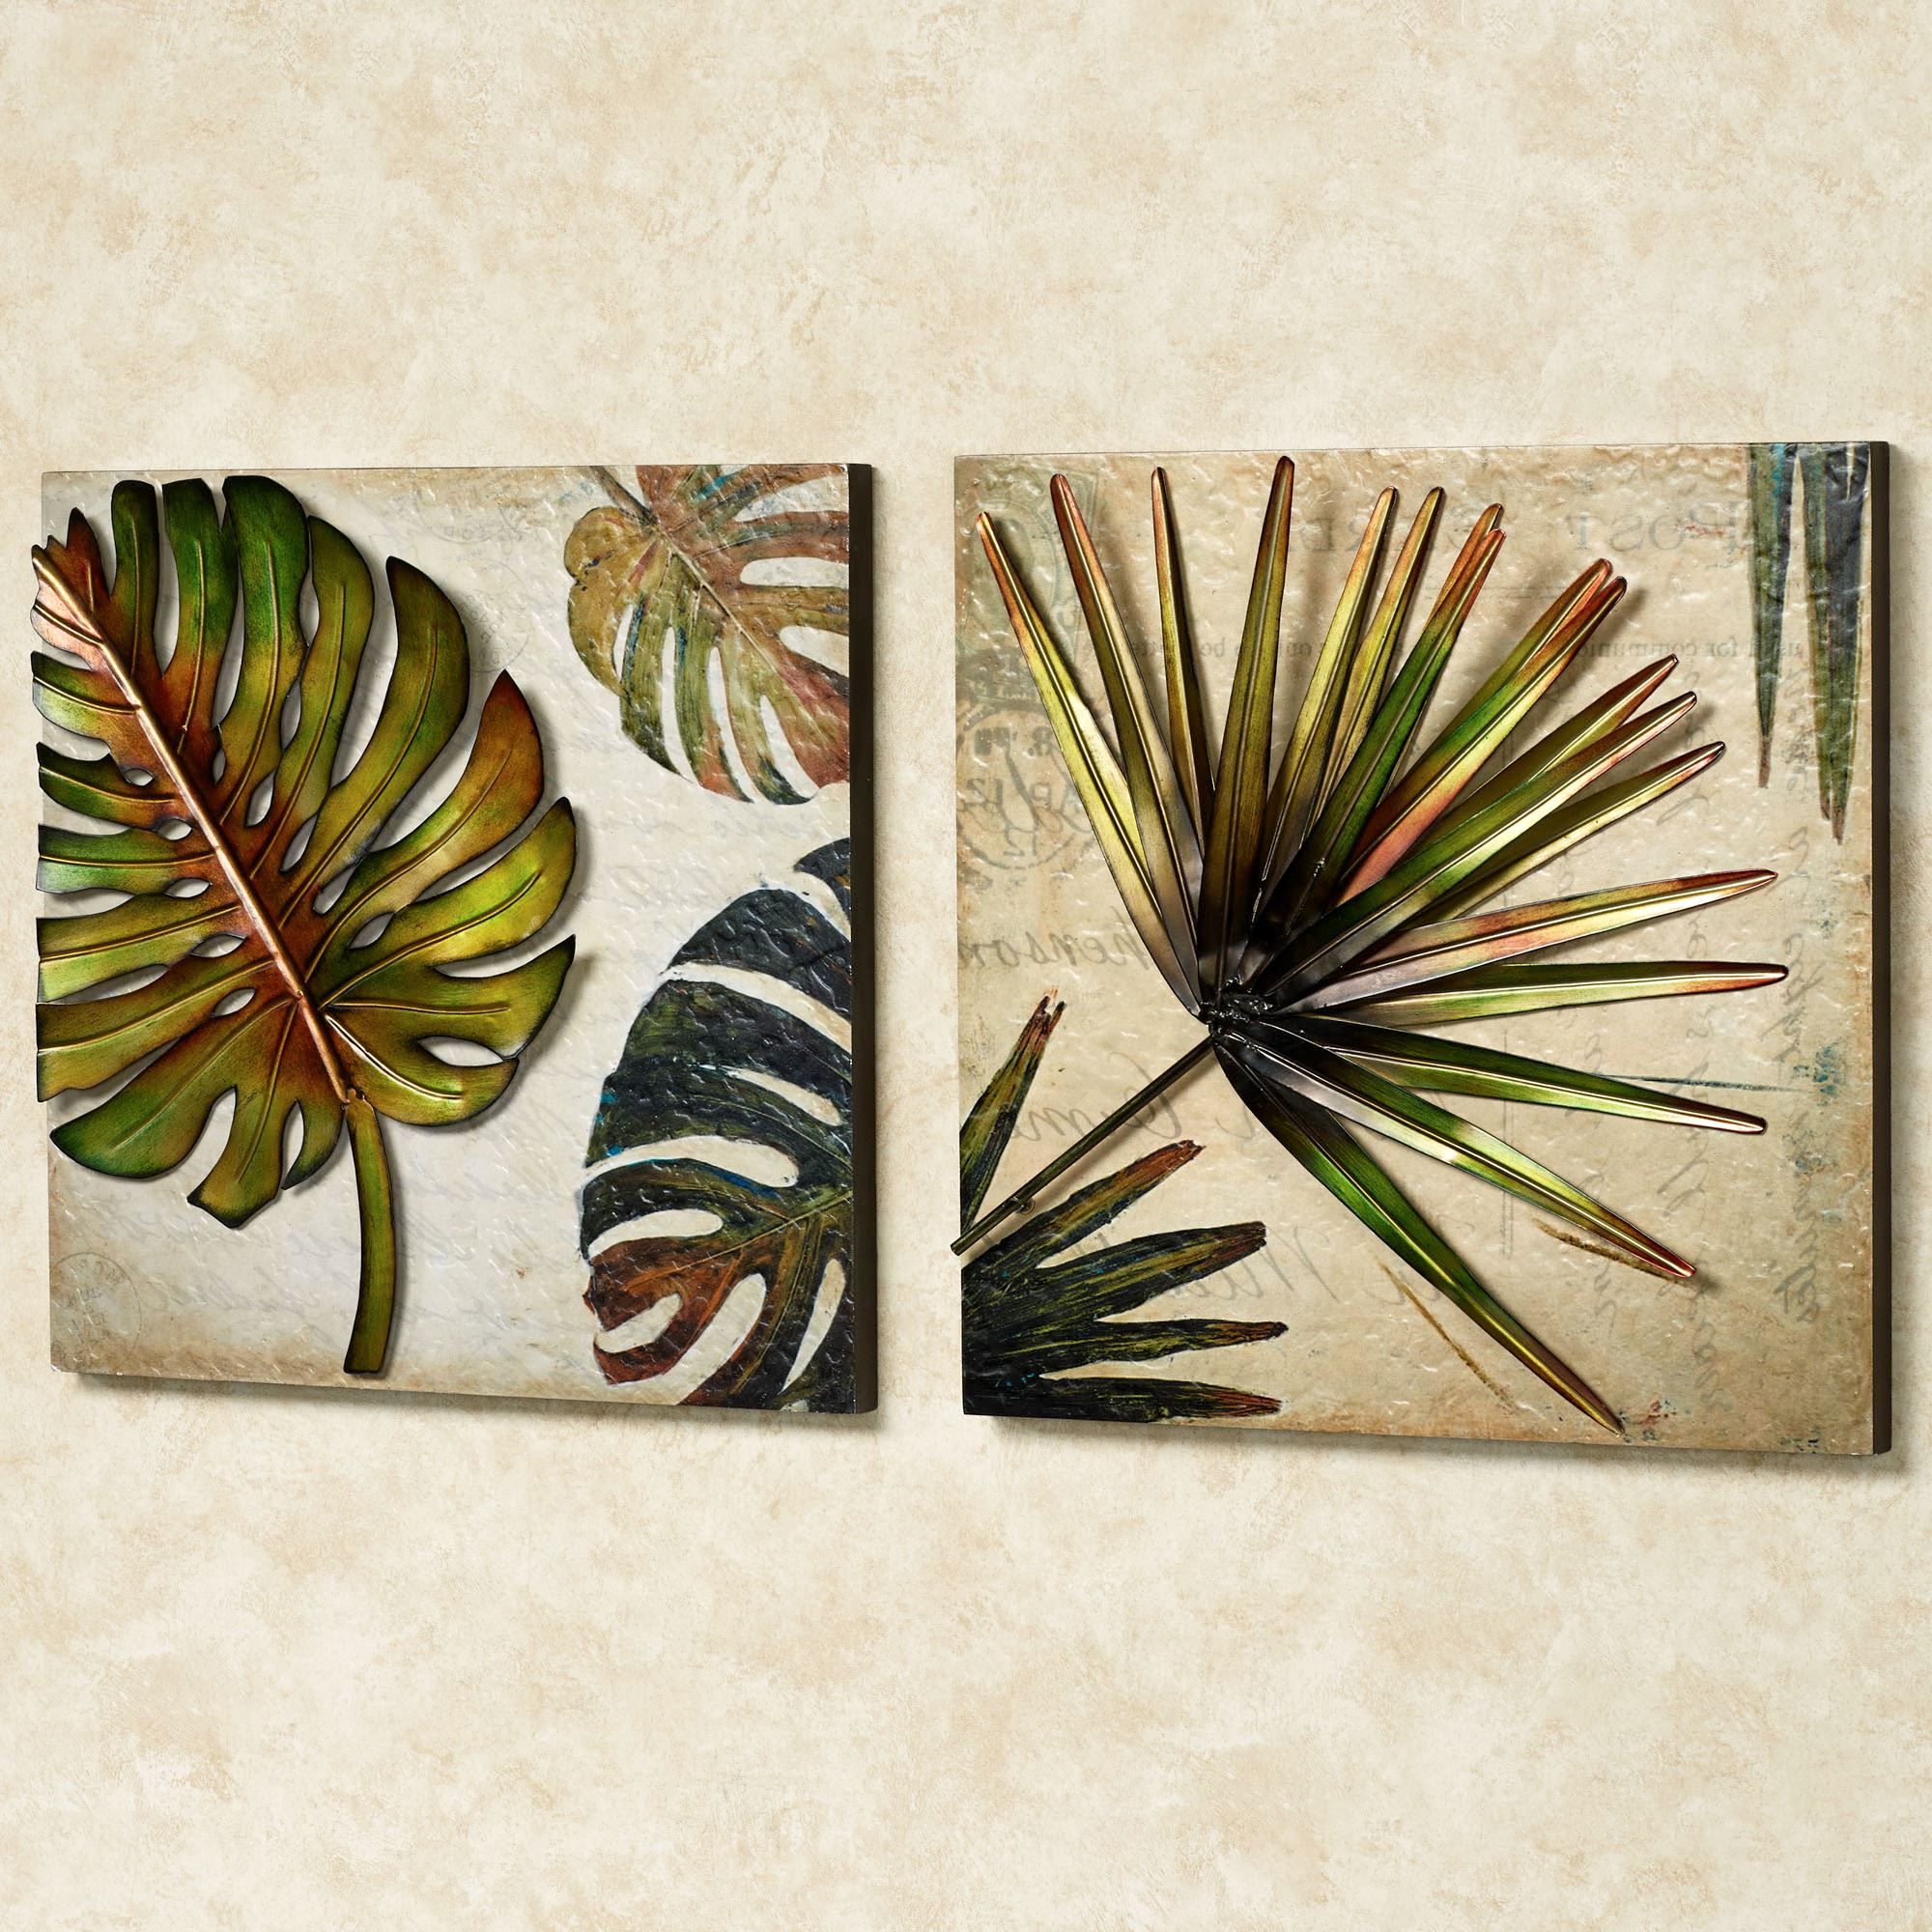 Tropical Impressions Dimensional Wall Art Set Inside Most Recent Dimensional Wall Art (View 14 of 15)